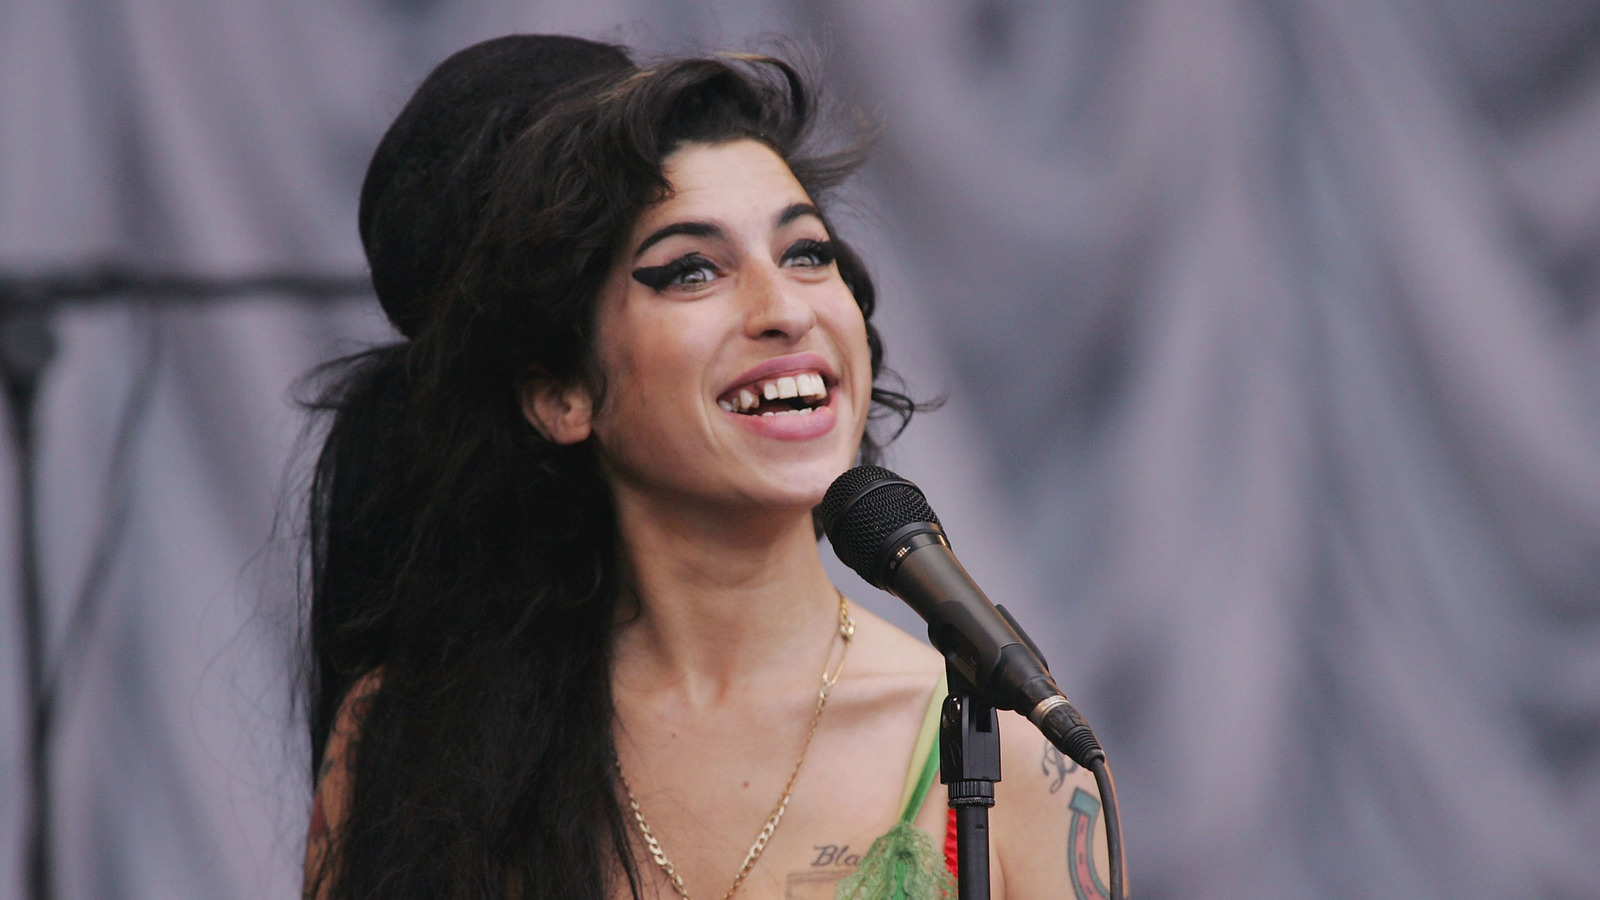 Amy Winehouse alive and kicking